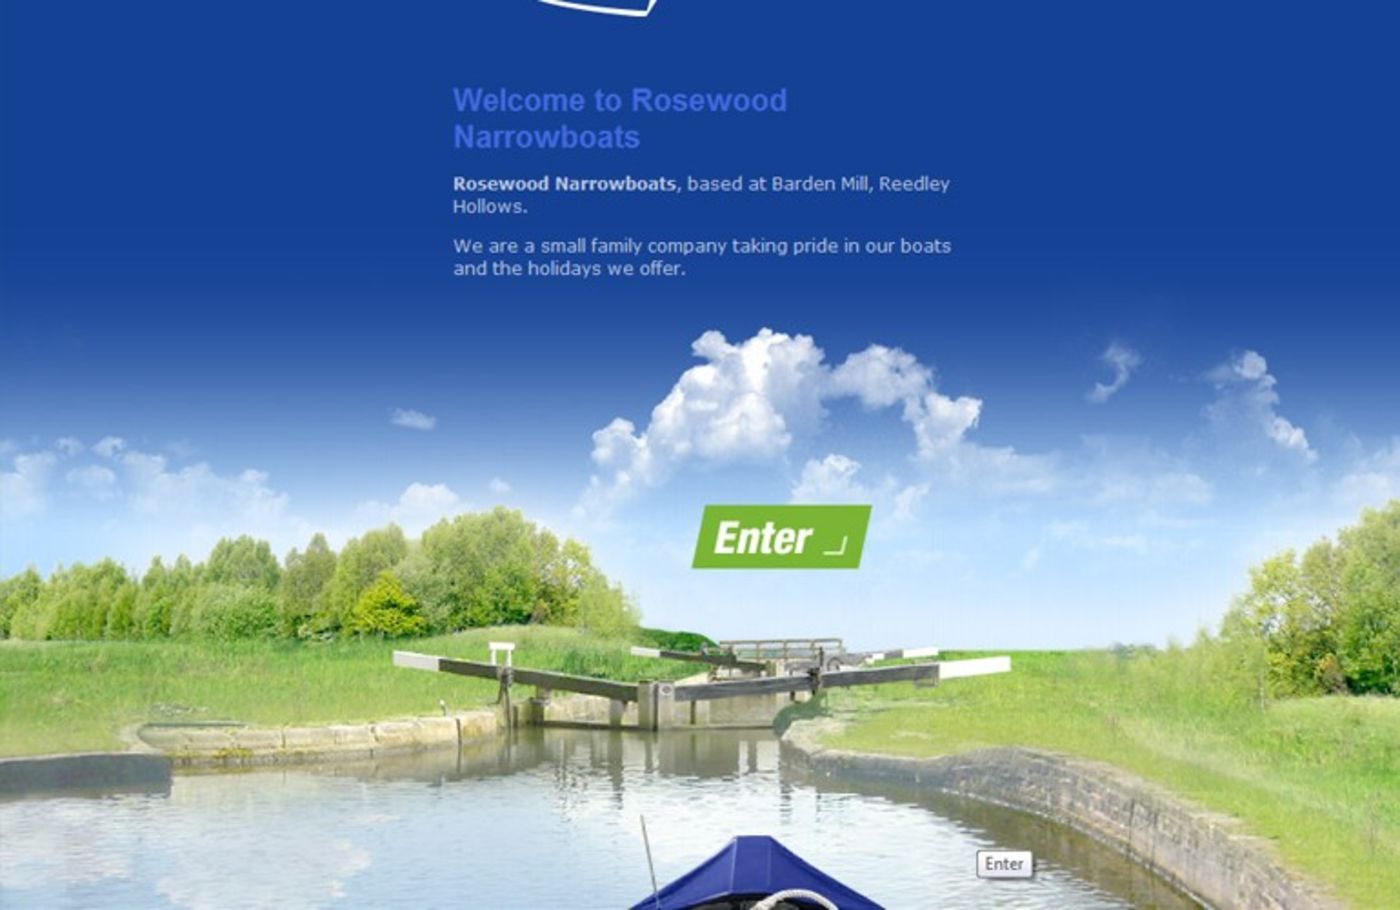 Rosewood Narrowboats Welcome